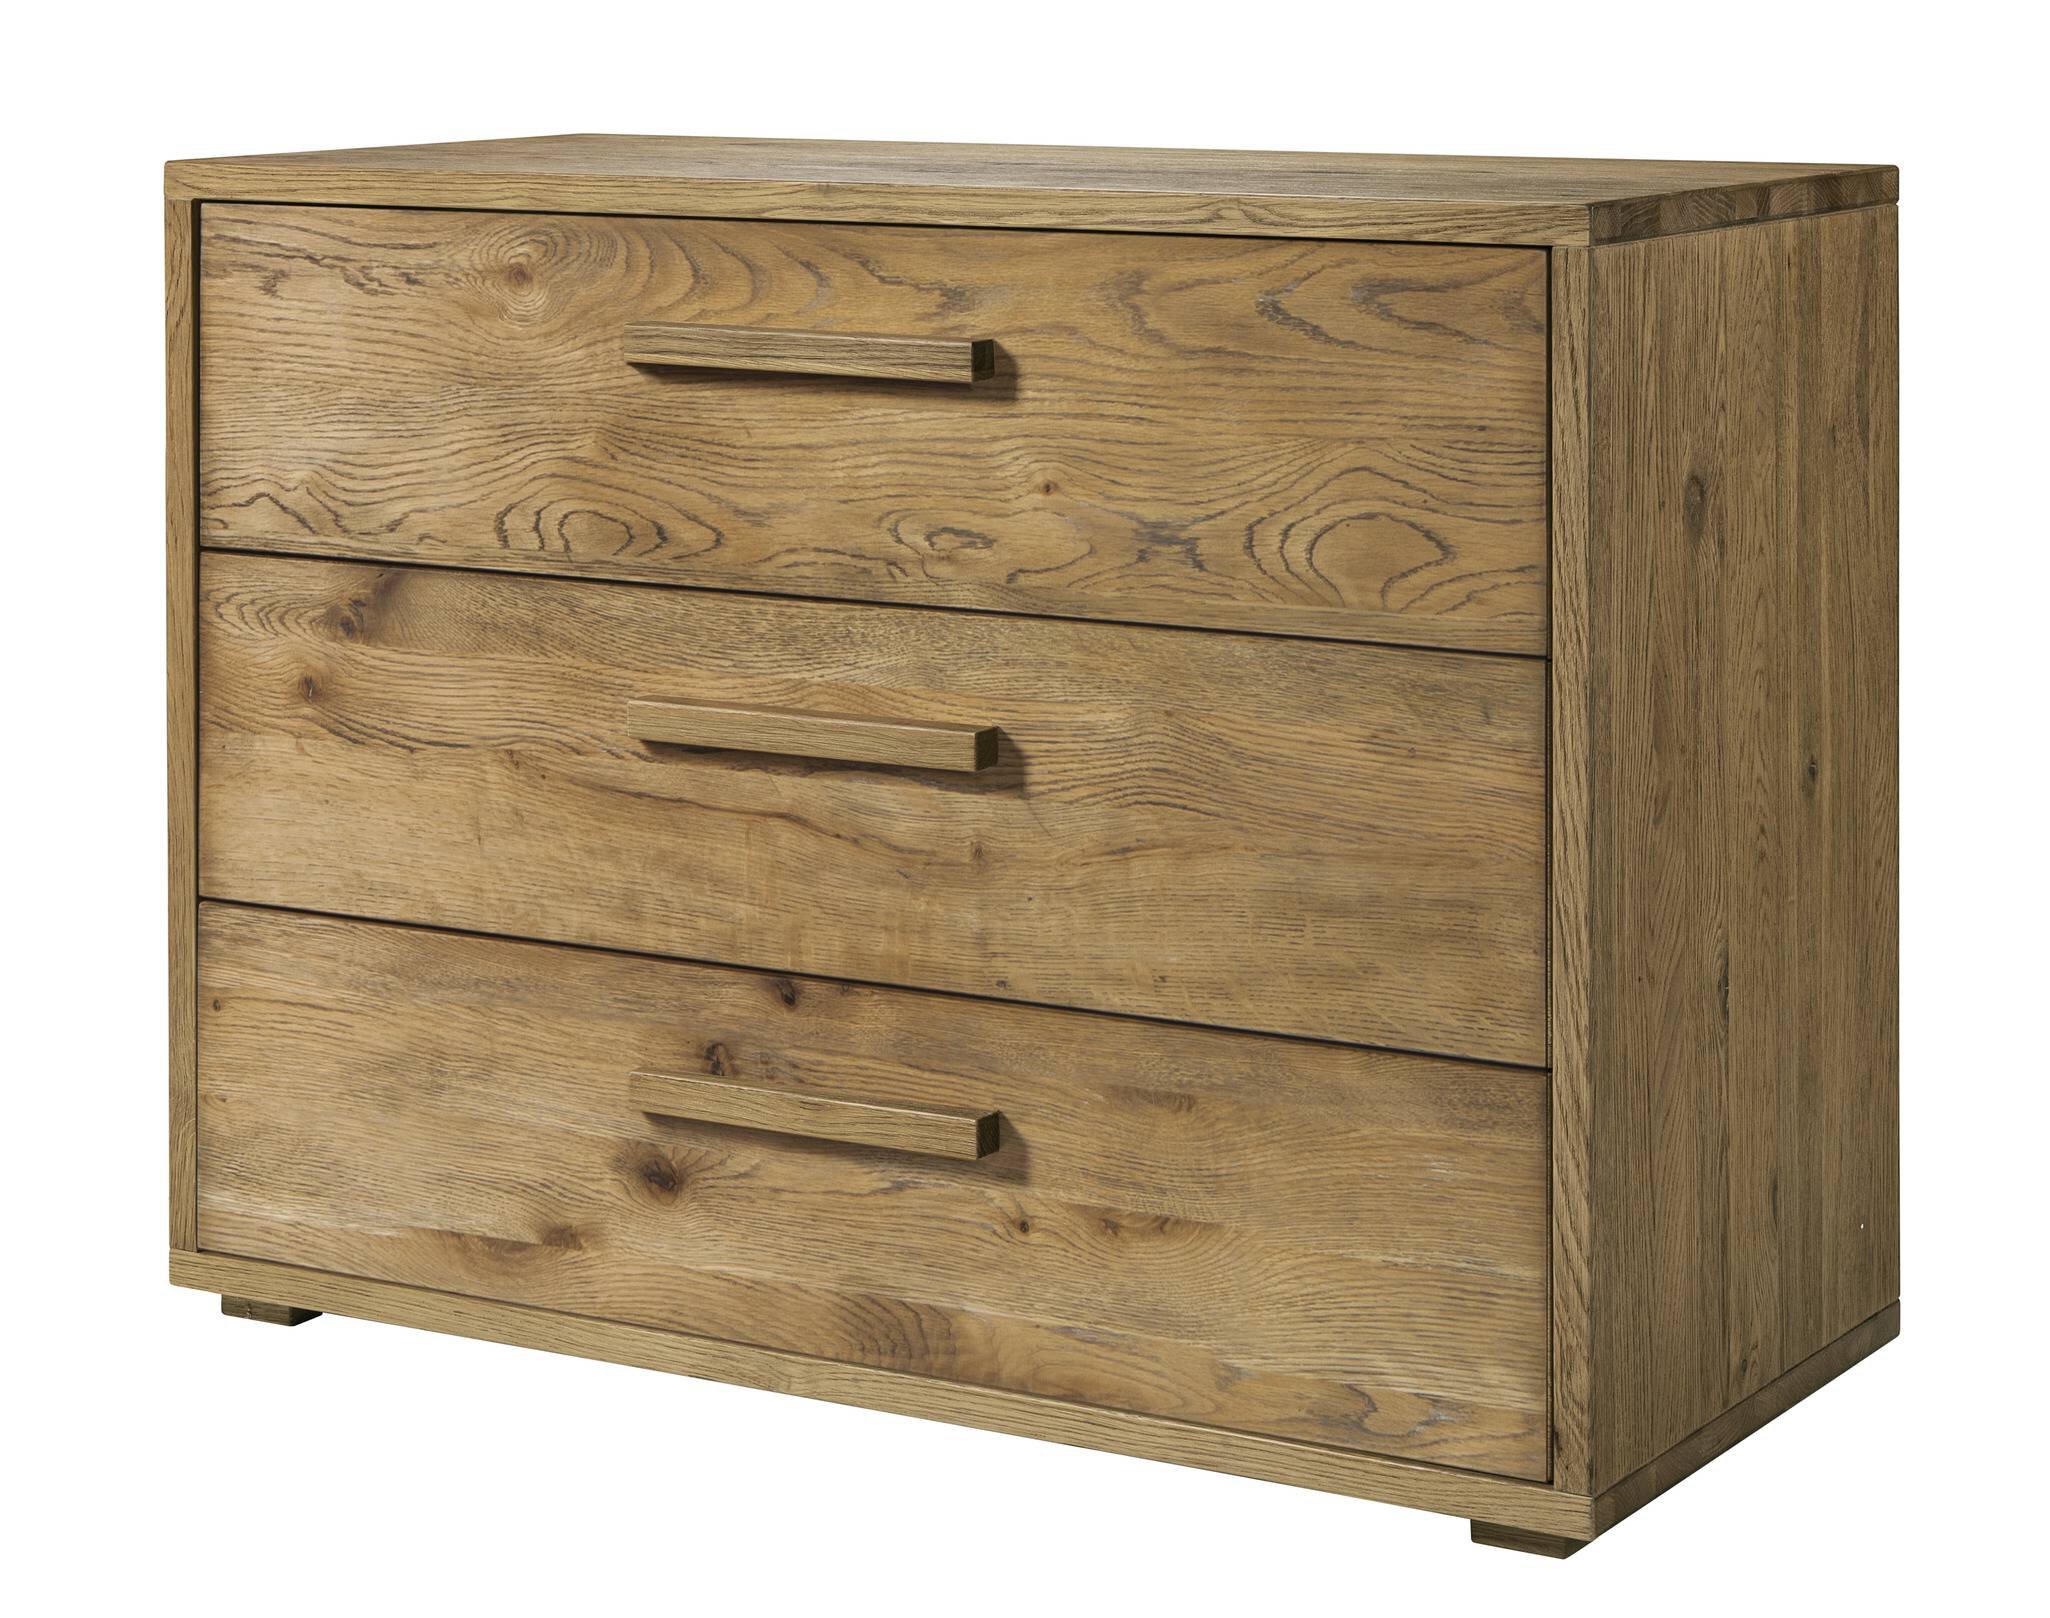 Cessina chest of drawers